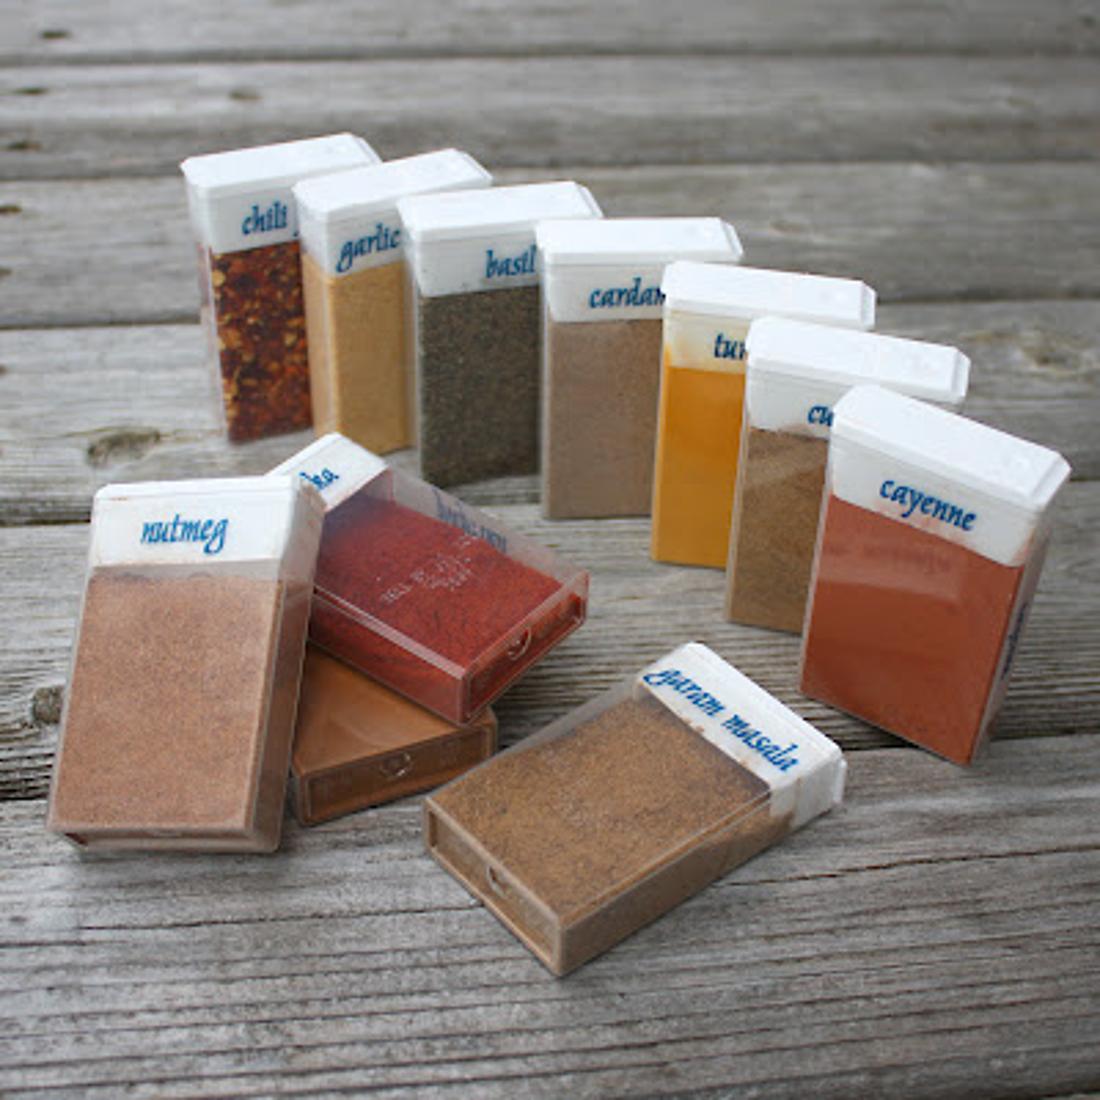 Use Tic-Tac boxes to store spices.